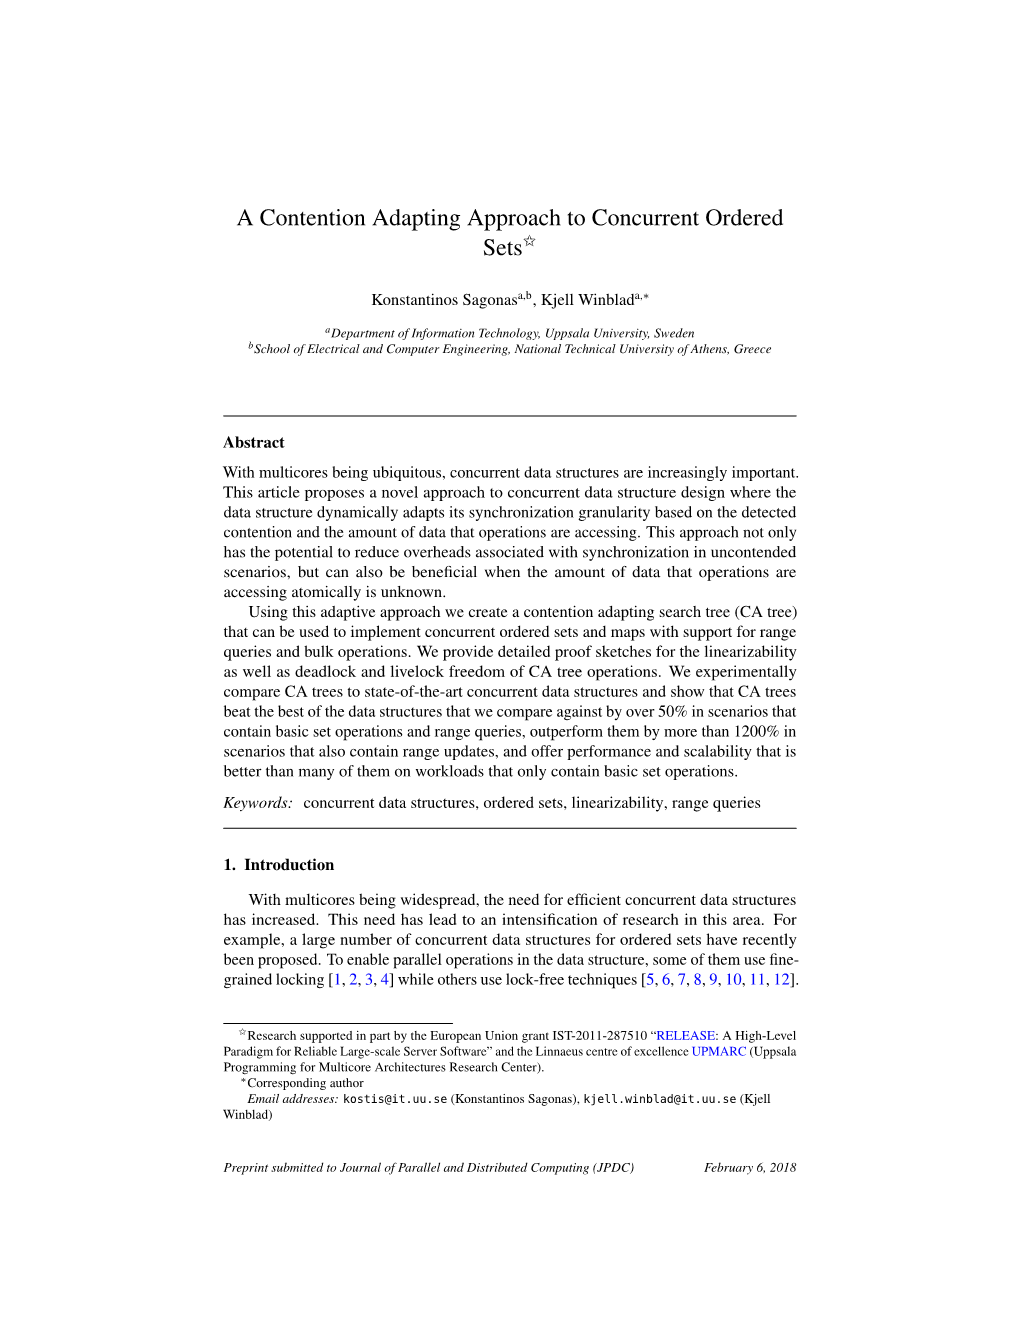 A Contention Adapting Approach to Concurrent Ordered Sets$